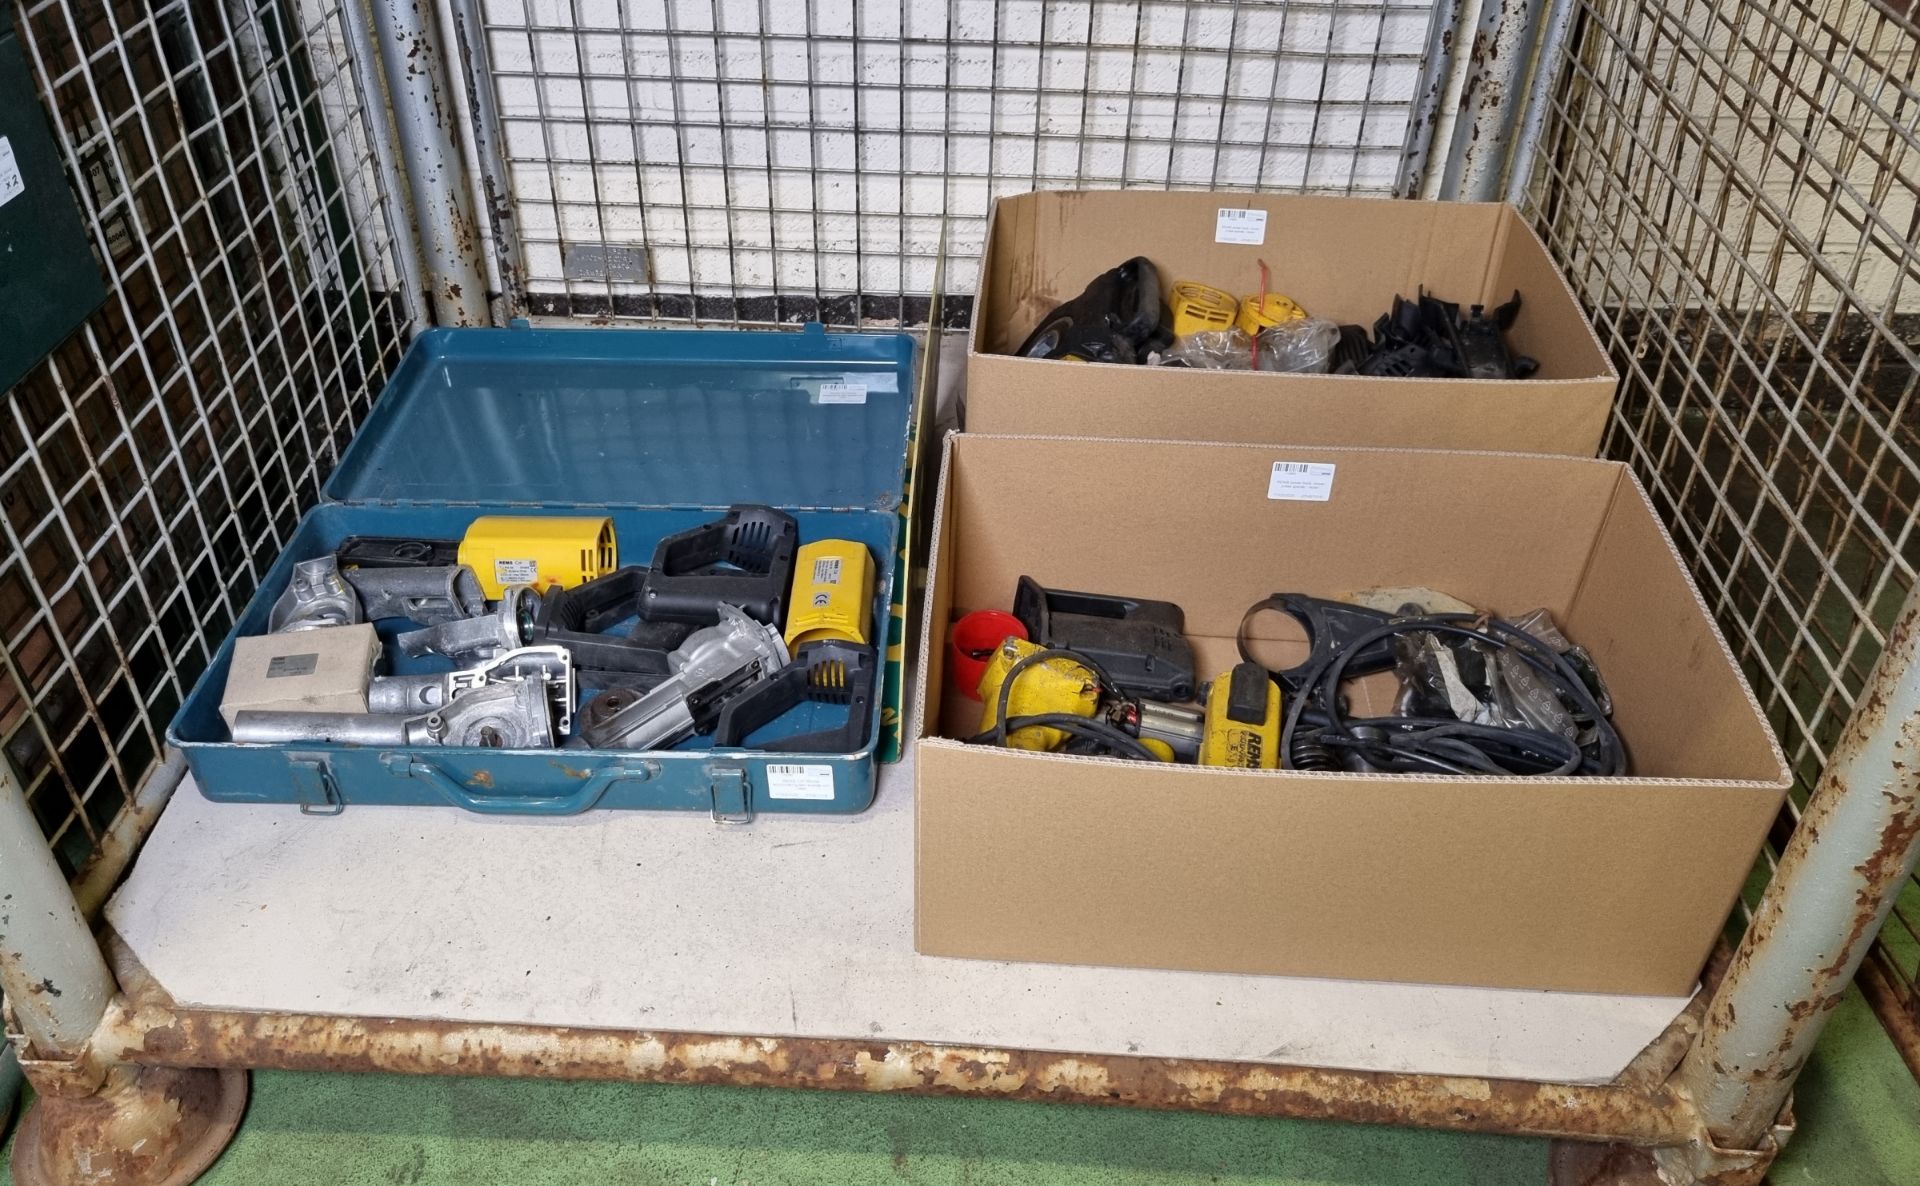 REMS CAT RW58 reciprocating saw spares with case, 2x REMS power tools - power press spares / repair